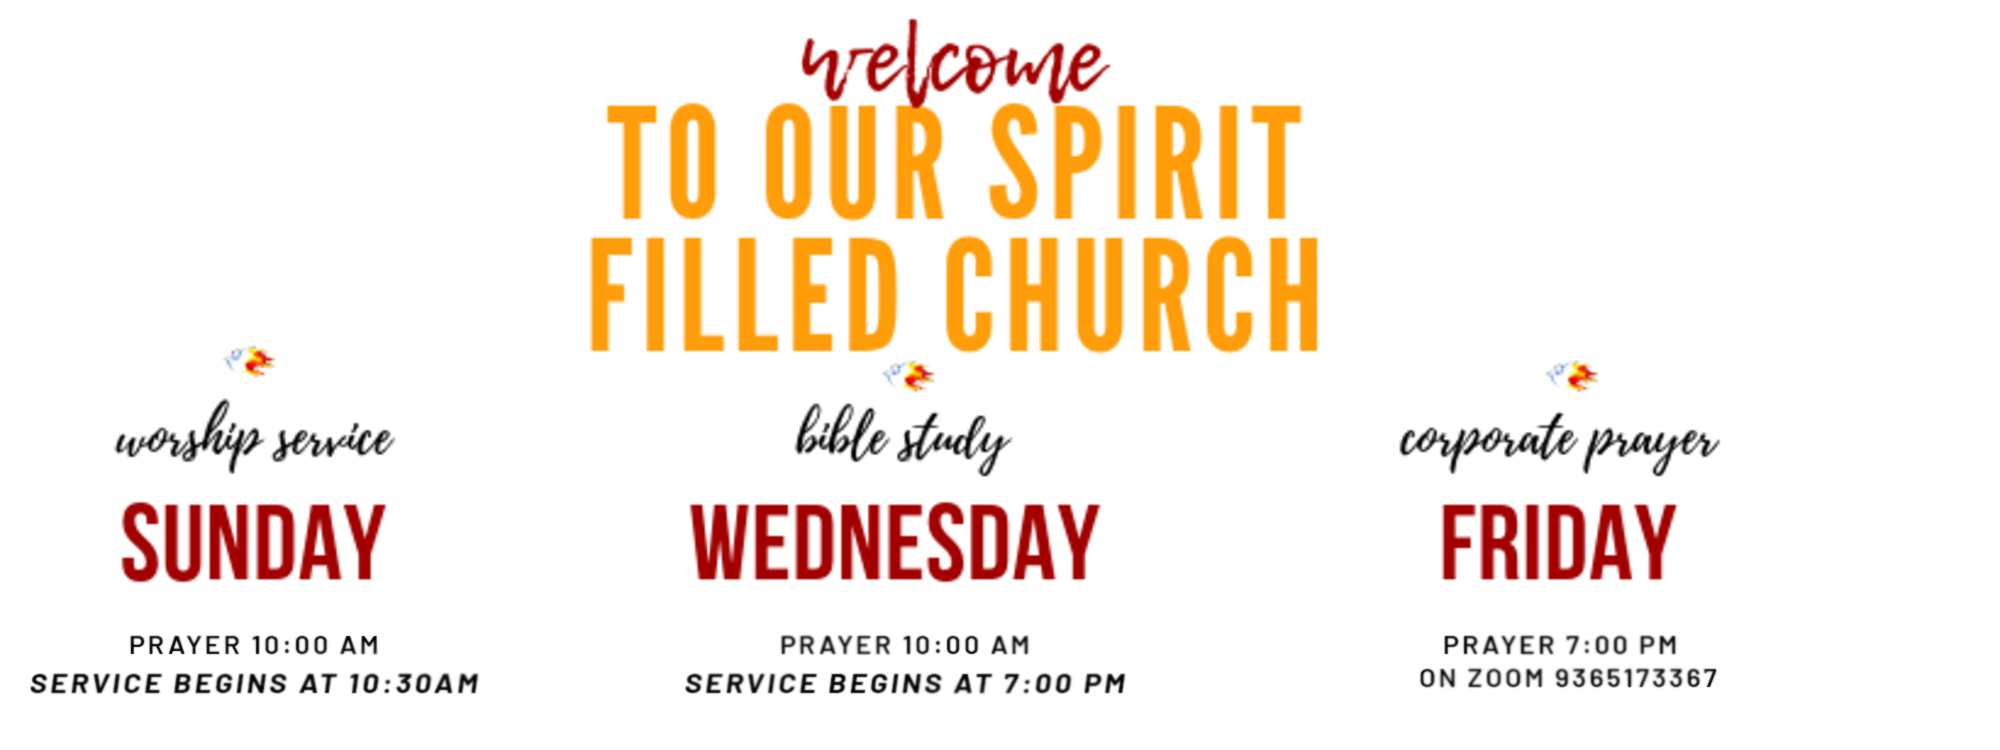 Welcome To Our Spirit Filled Church